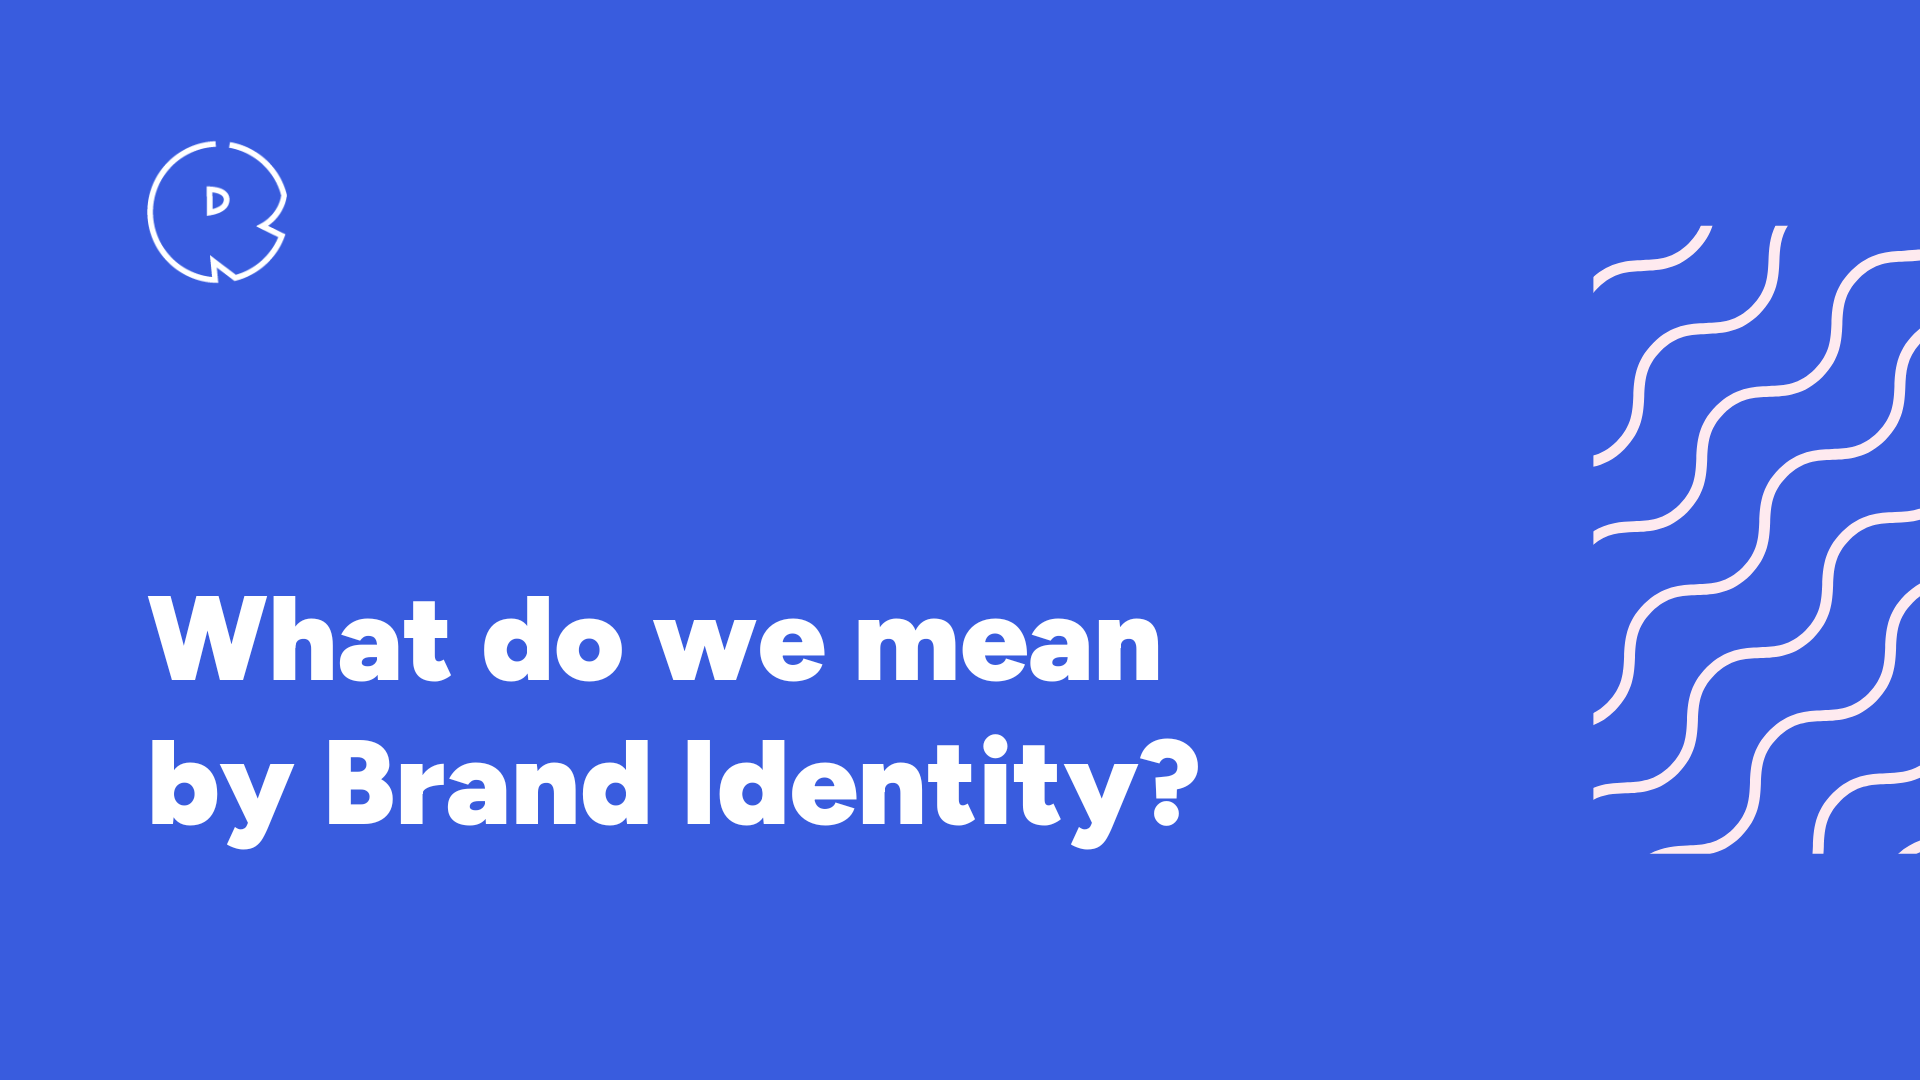 What do we mean by Brand Identity?